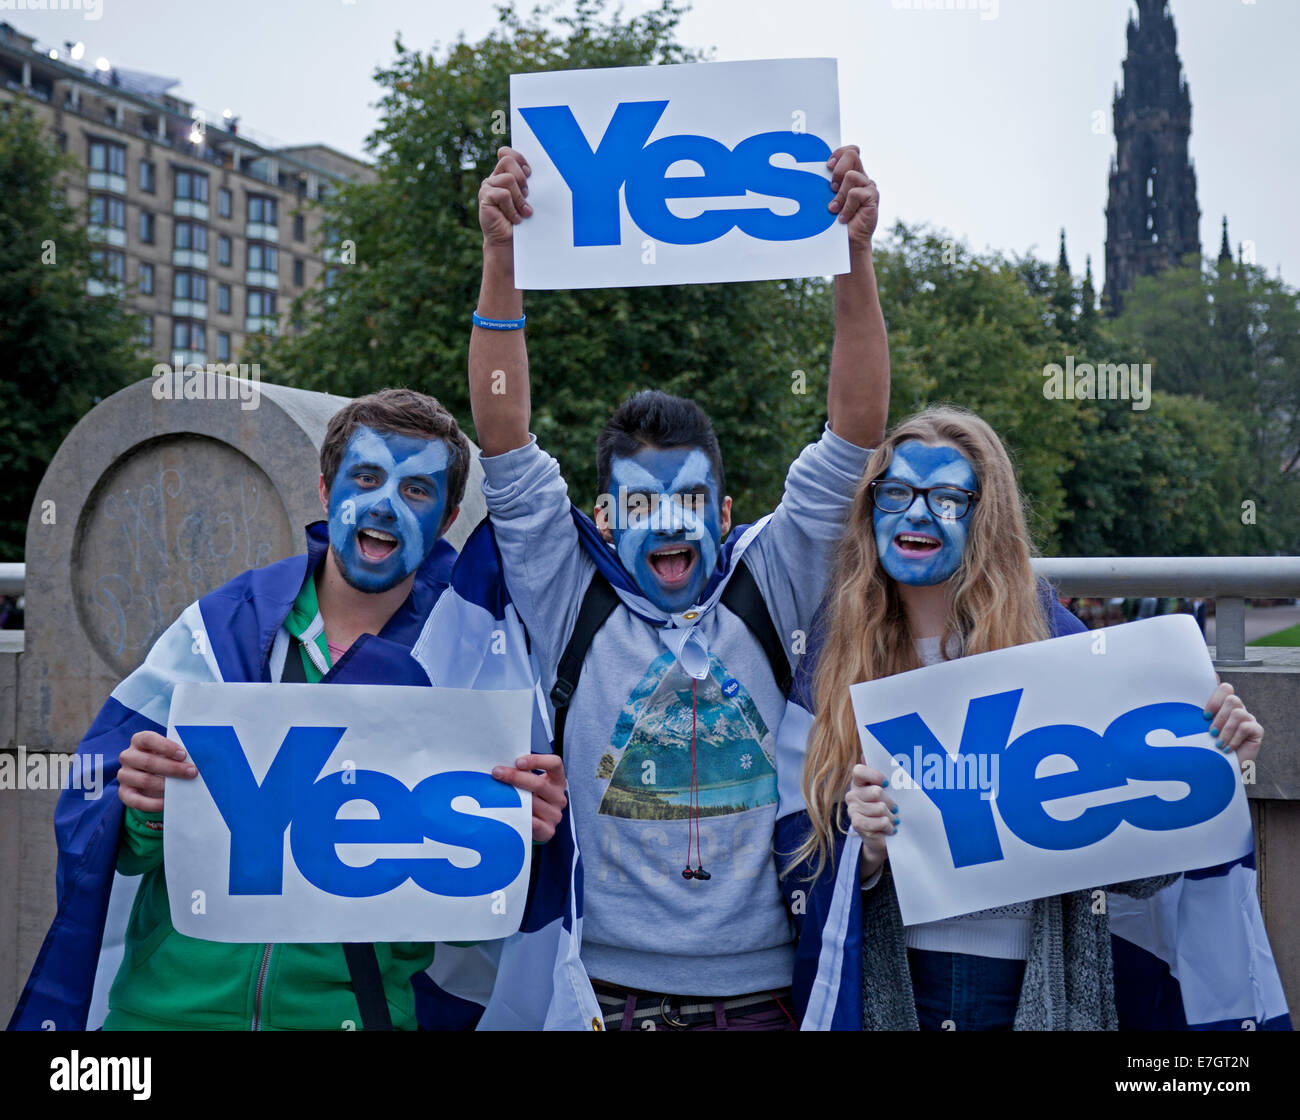 Edinburgh, Scotlland. Scottish Independence Referendum. 17th Sept. 2014. On the evening before Scotland votes three Edinburgh students put their saltire face paint on to back the Yes Campaign. Stock Photo